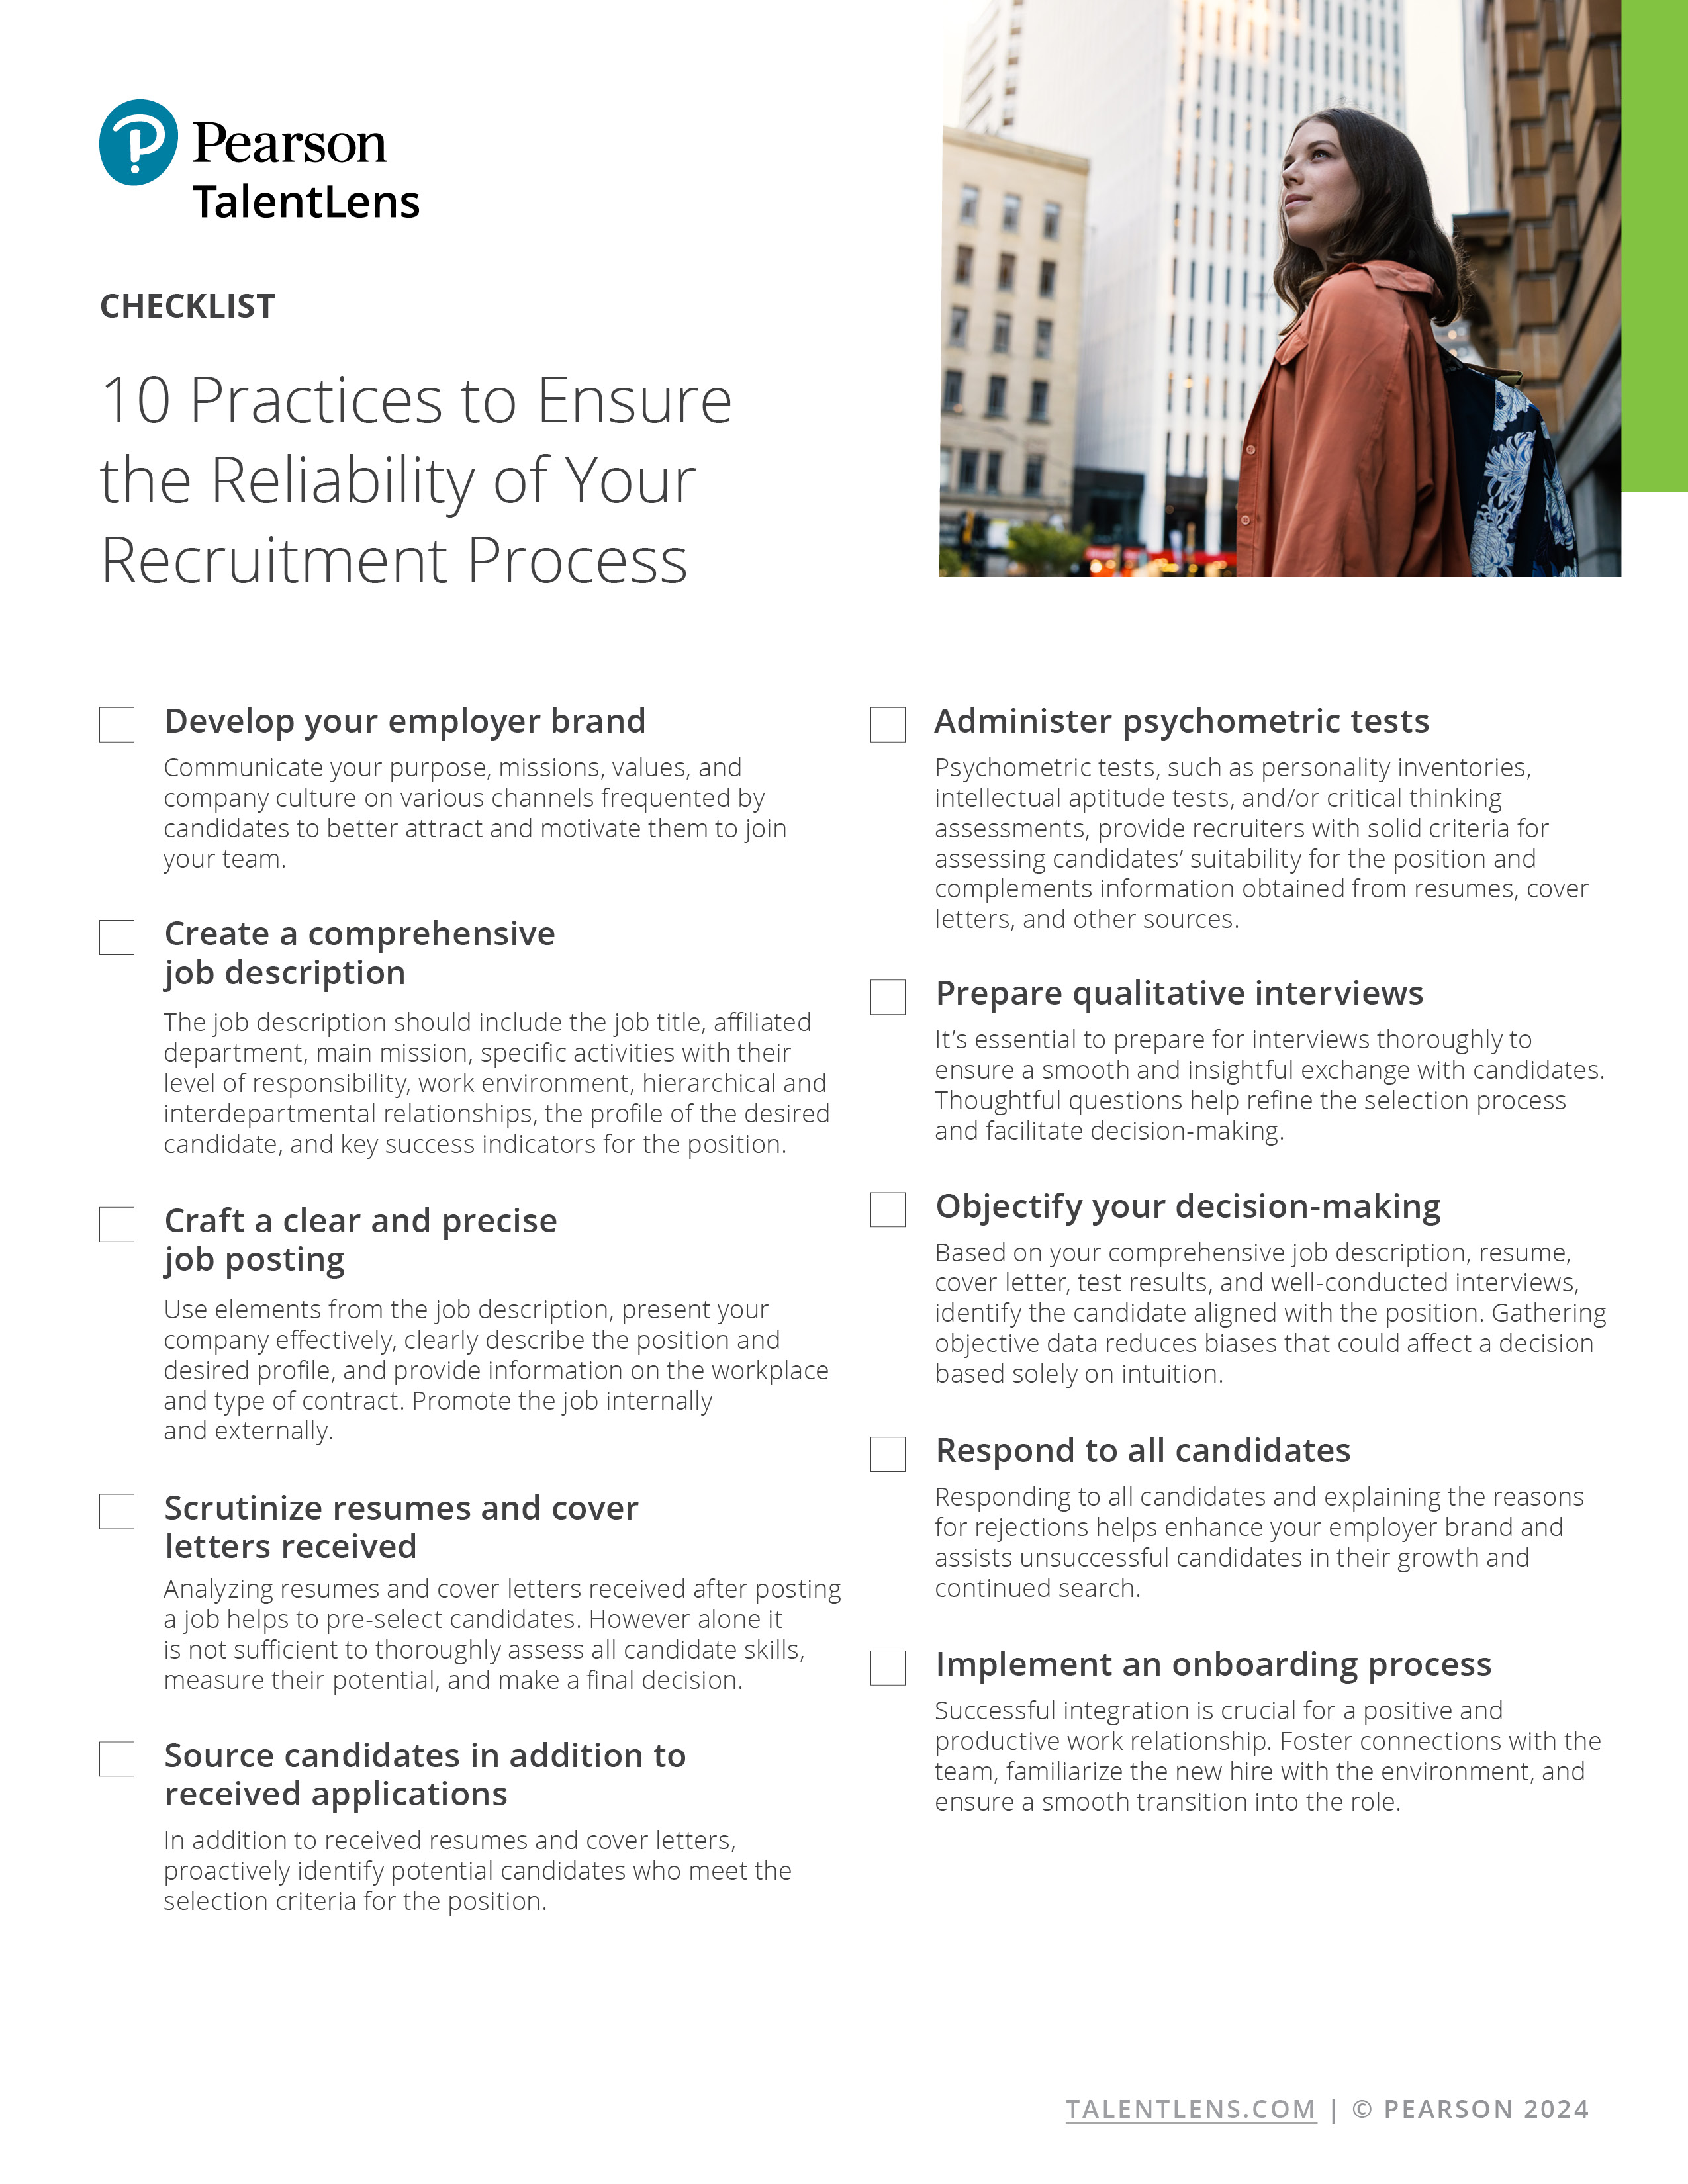 10 Practices to Ensure the Reliability of Your Recruitment Process